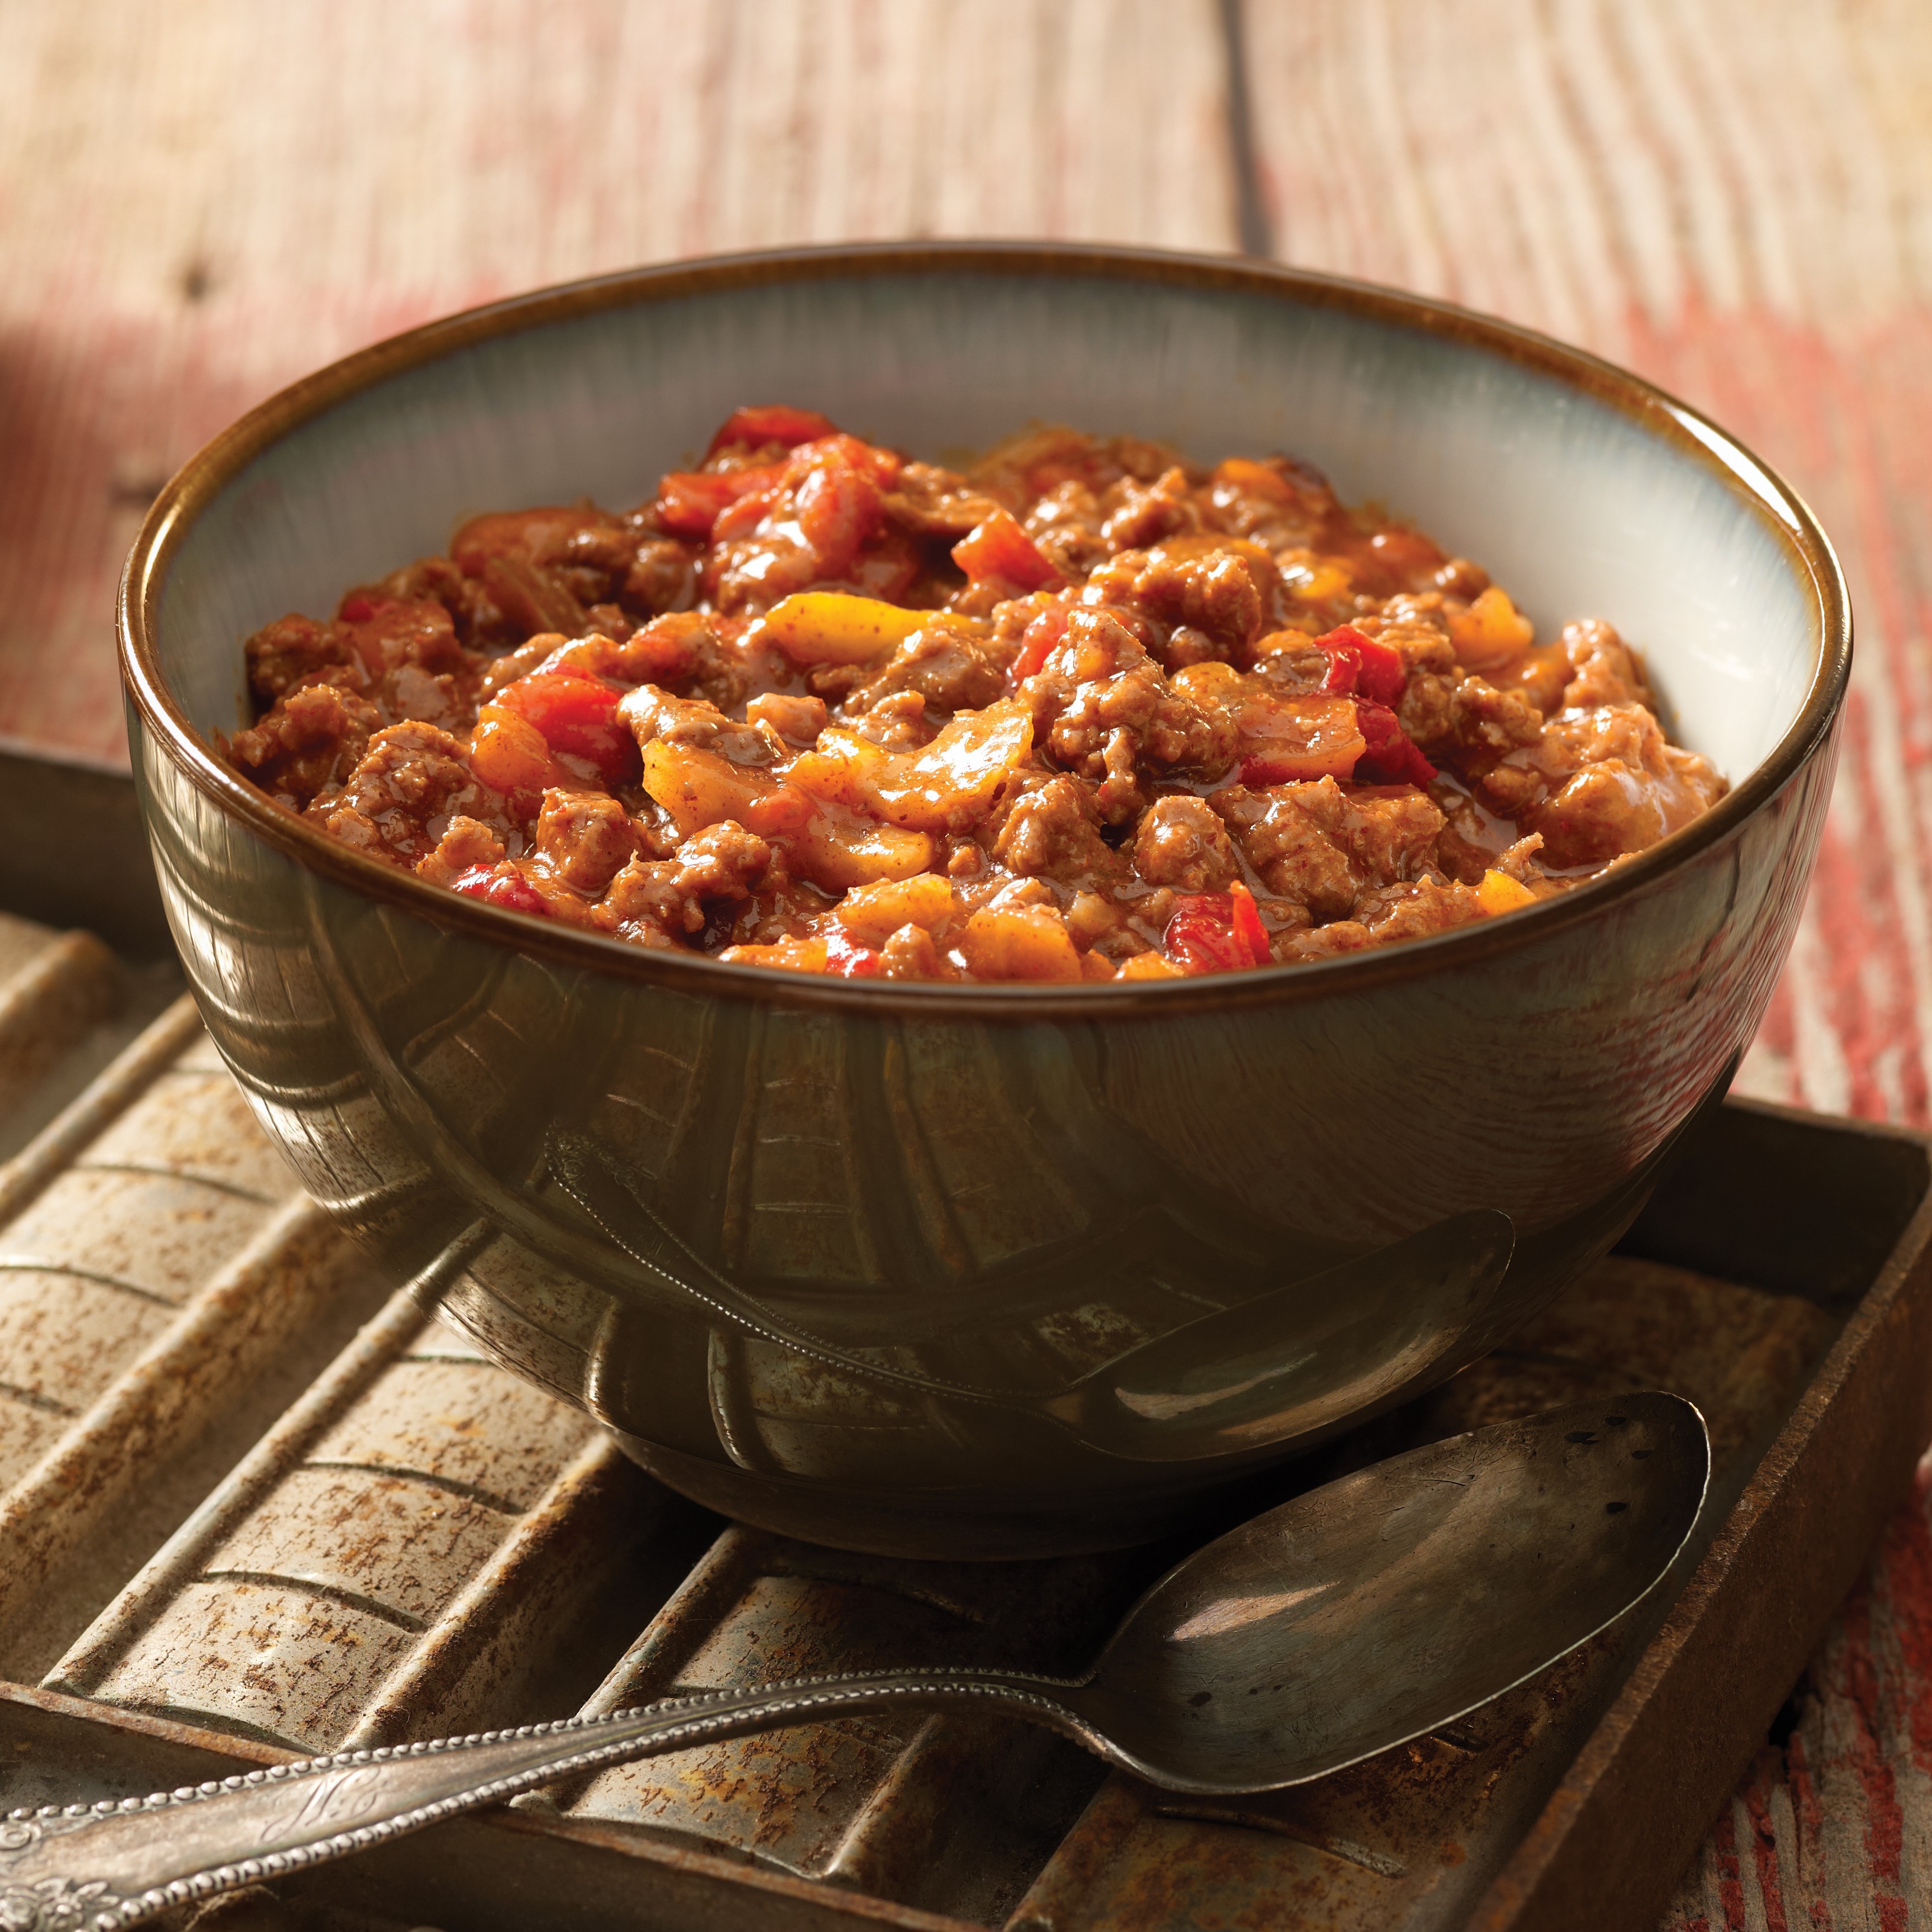 Bowl of foodservice Whitey's Frozen Chili Manufacturers Jalapeno Beef Chili in a restaurant setting